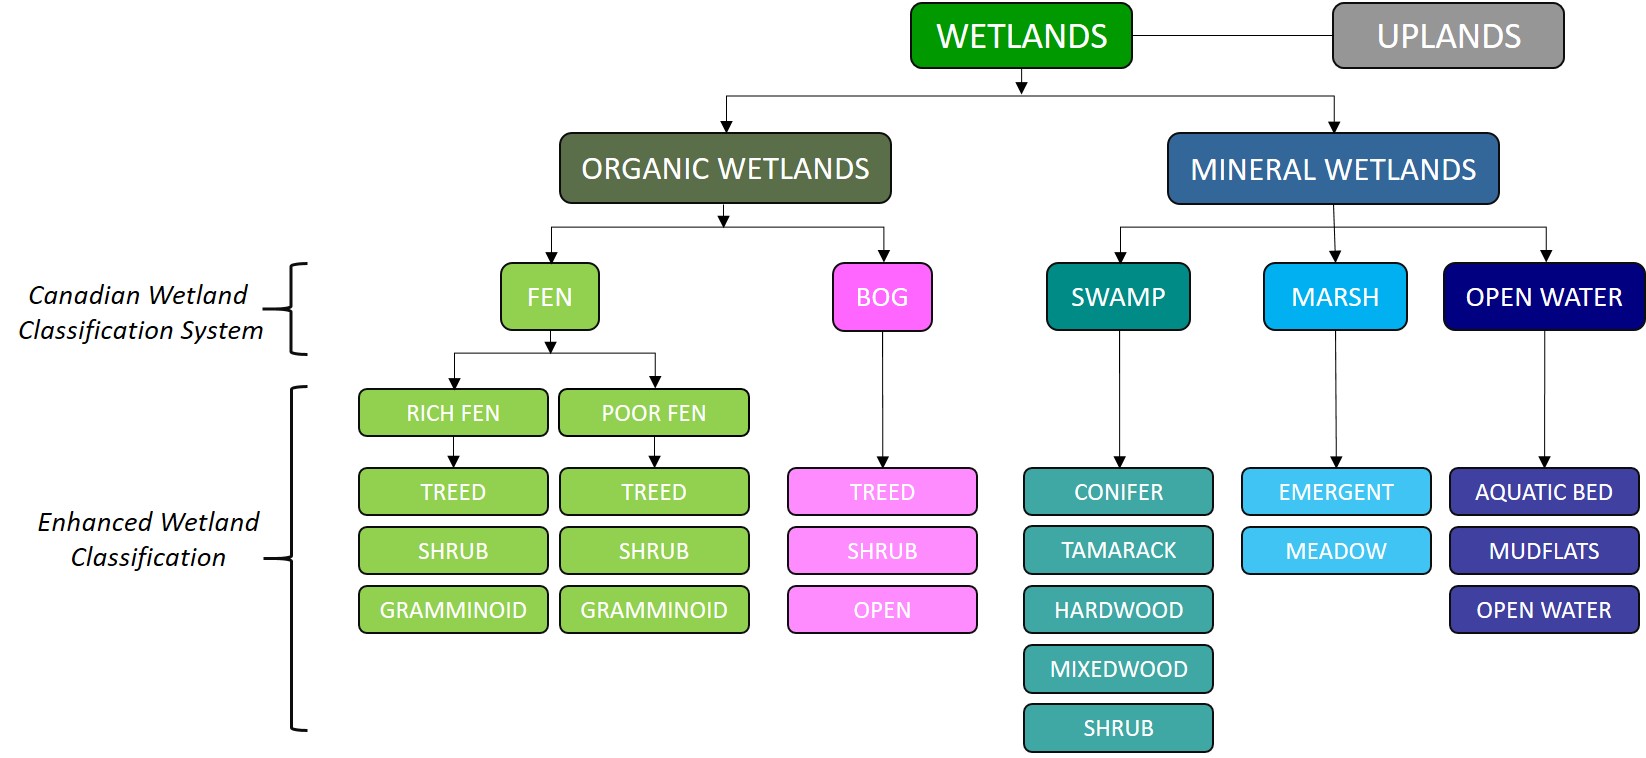 Hierarchal classification structure for the Canadian Wetland Classification System and Enhanced Wetland Classification.